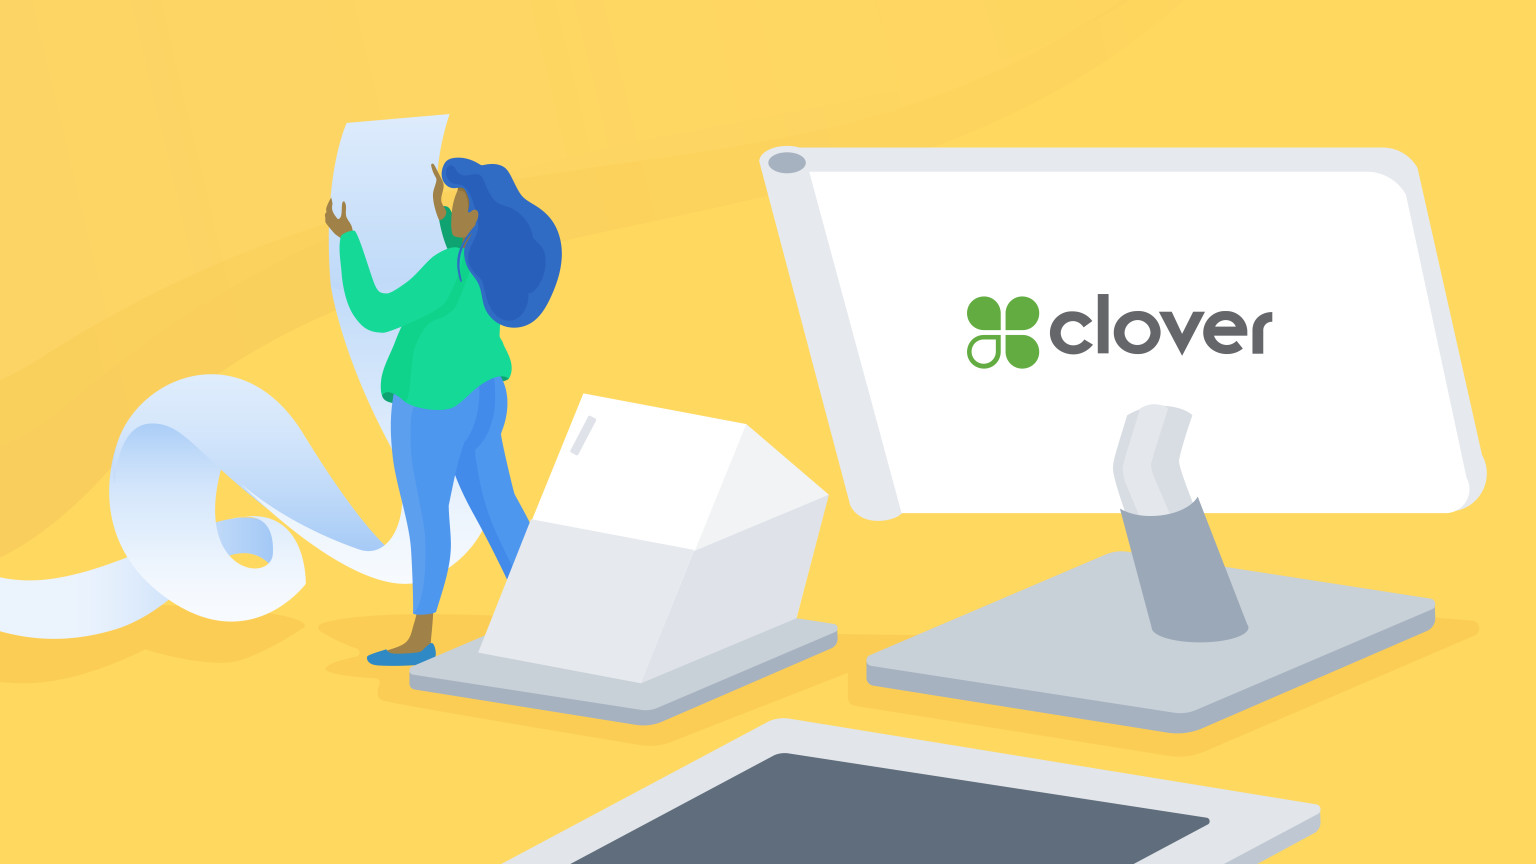 Blog header, illustration of person using a clover device 